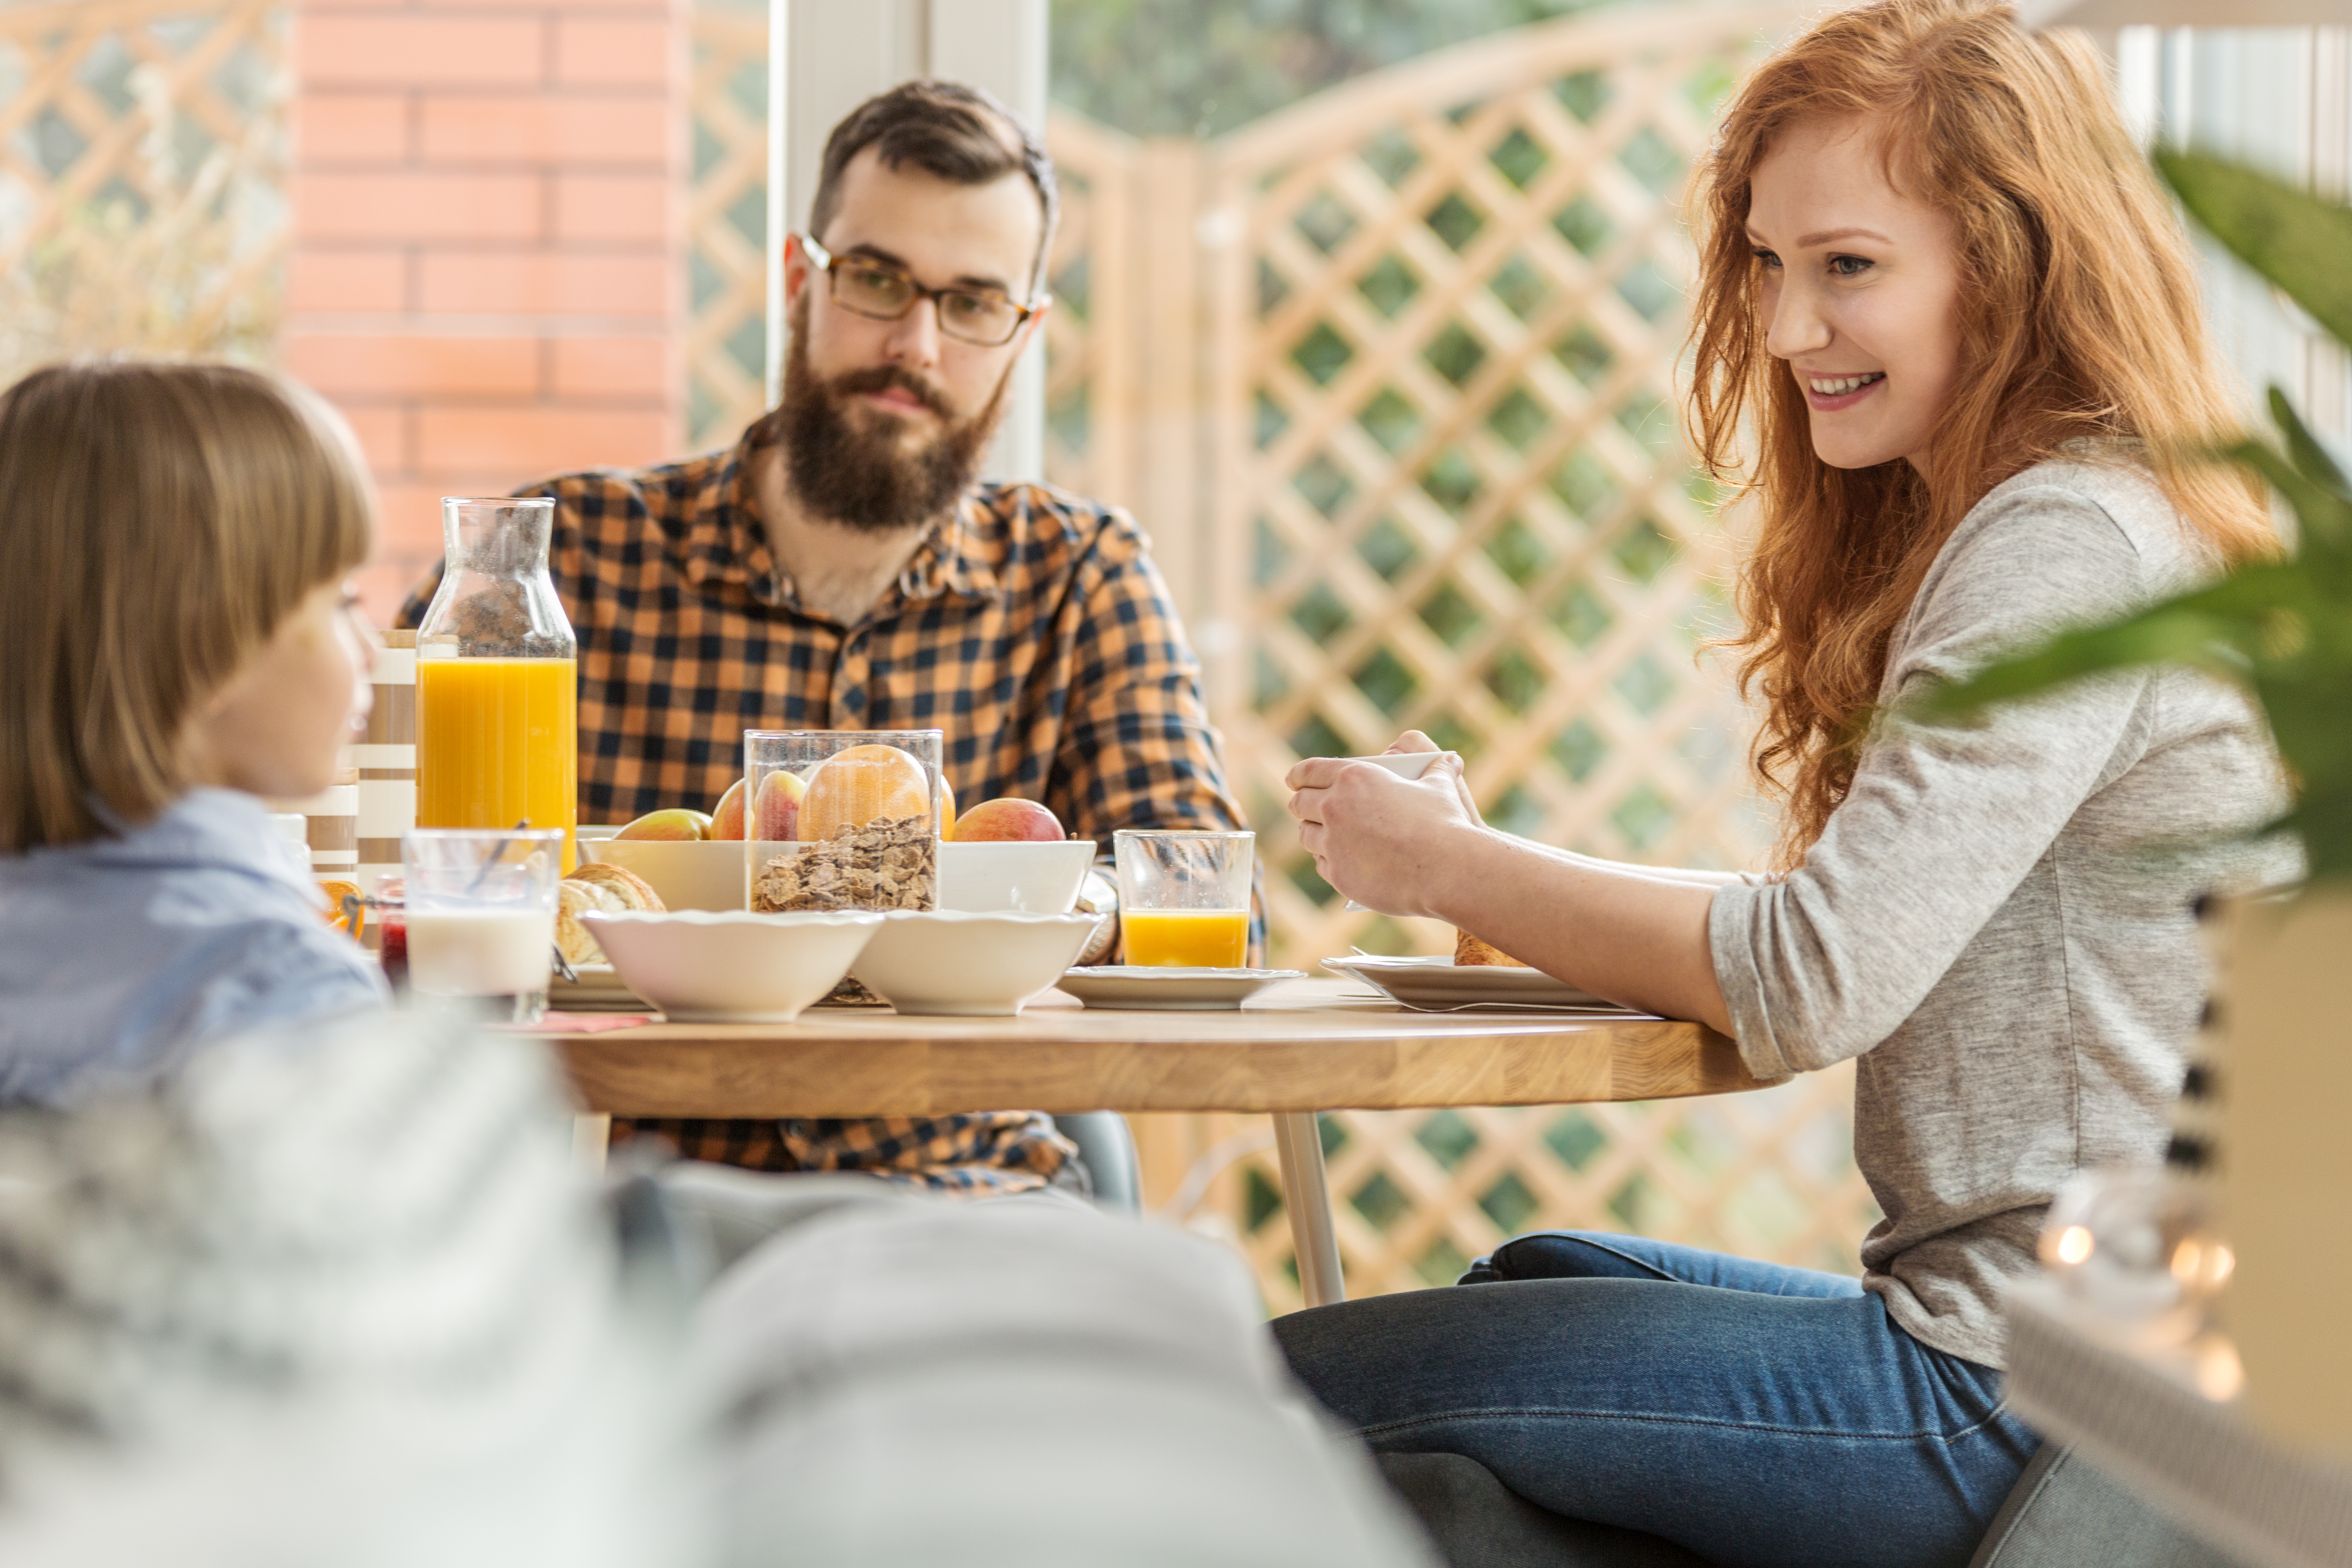 Man, woman, and child enjoy eating breakfast outdoors on a patio 